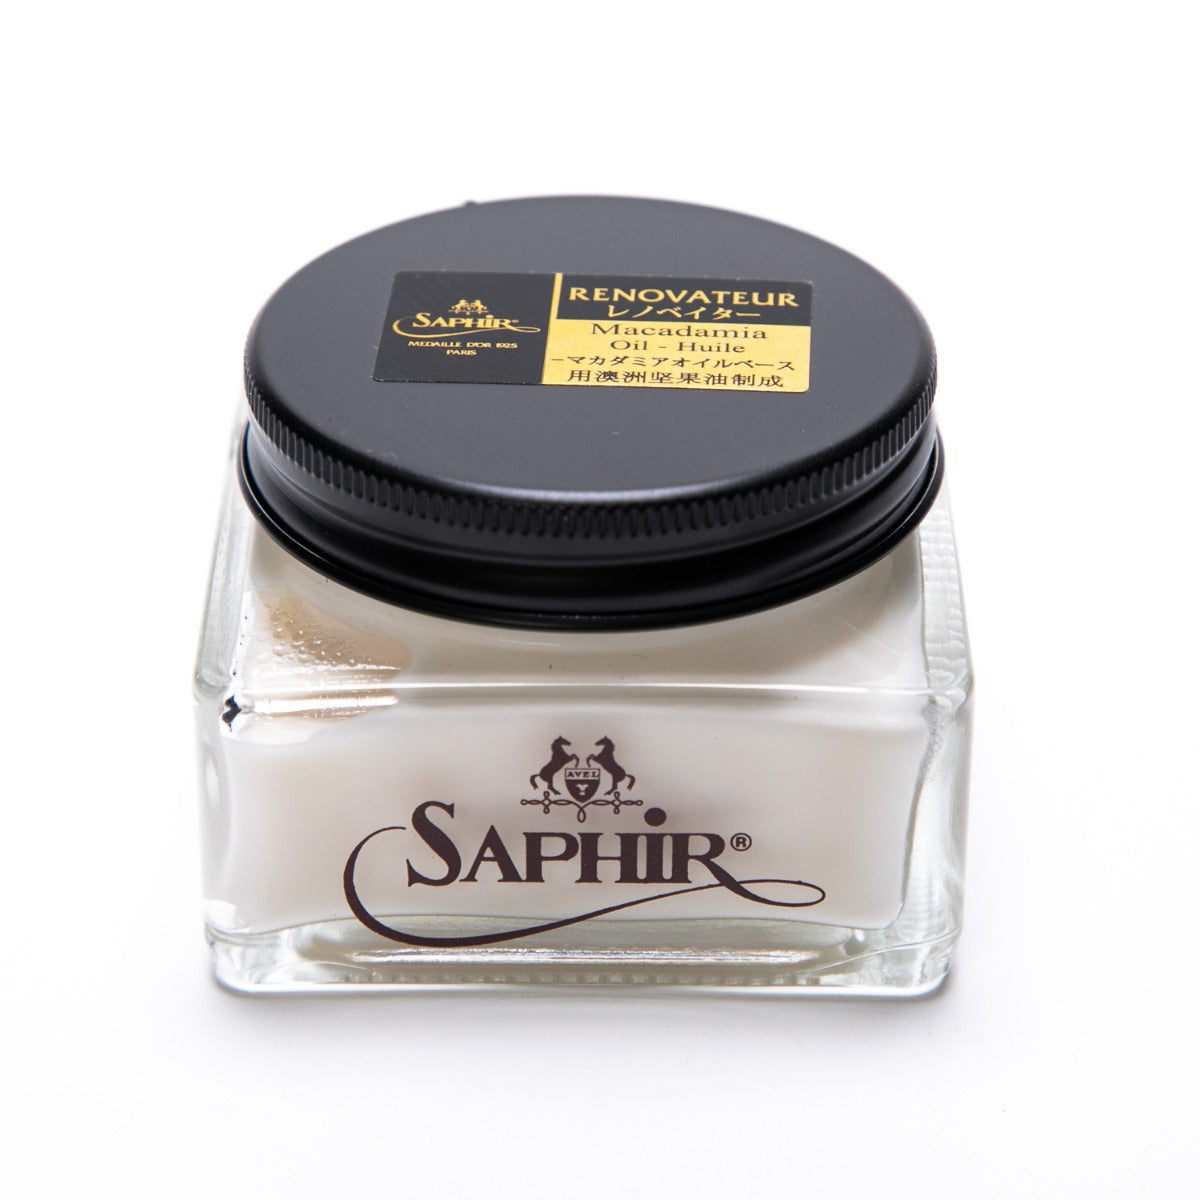 A jar of Saphir Renovateur w/ Macadamia Oil conditioner by KirbyAllison.com with a label on it.